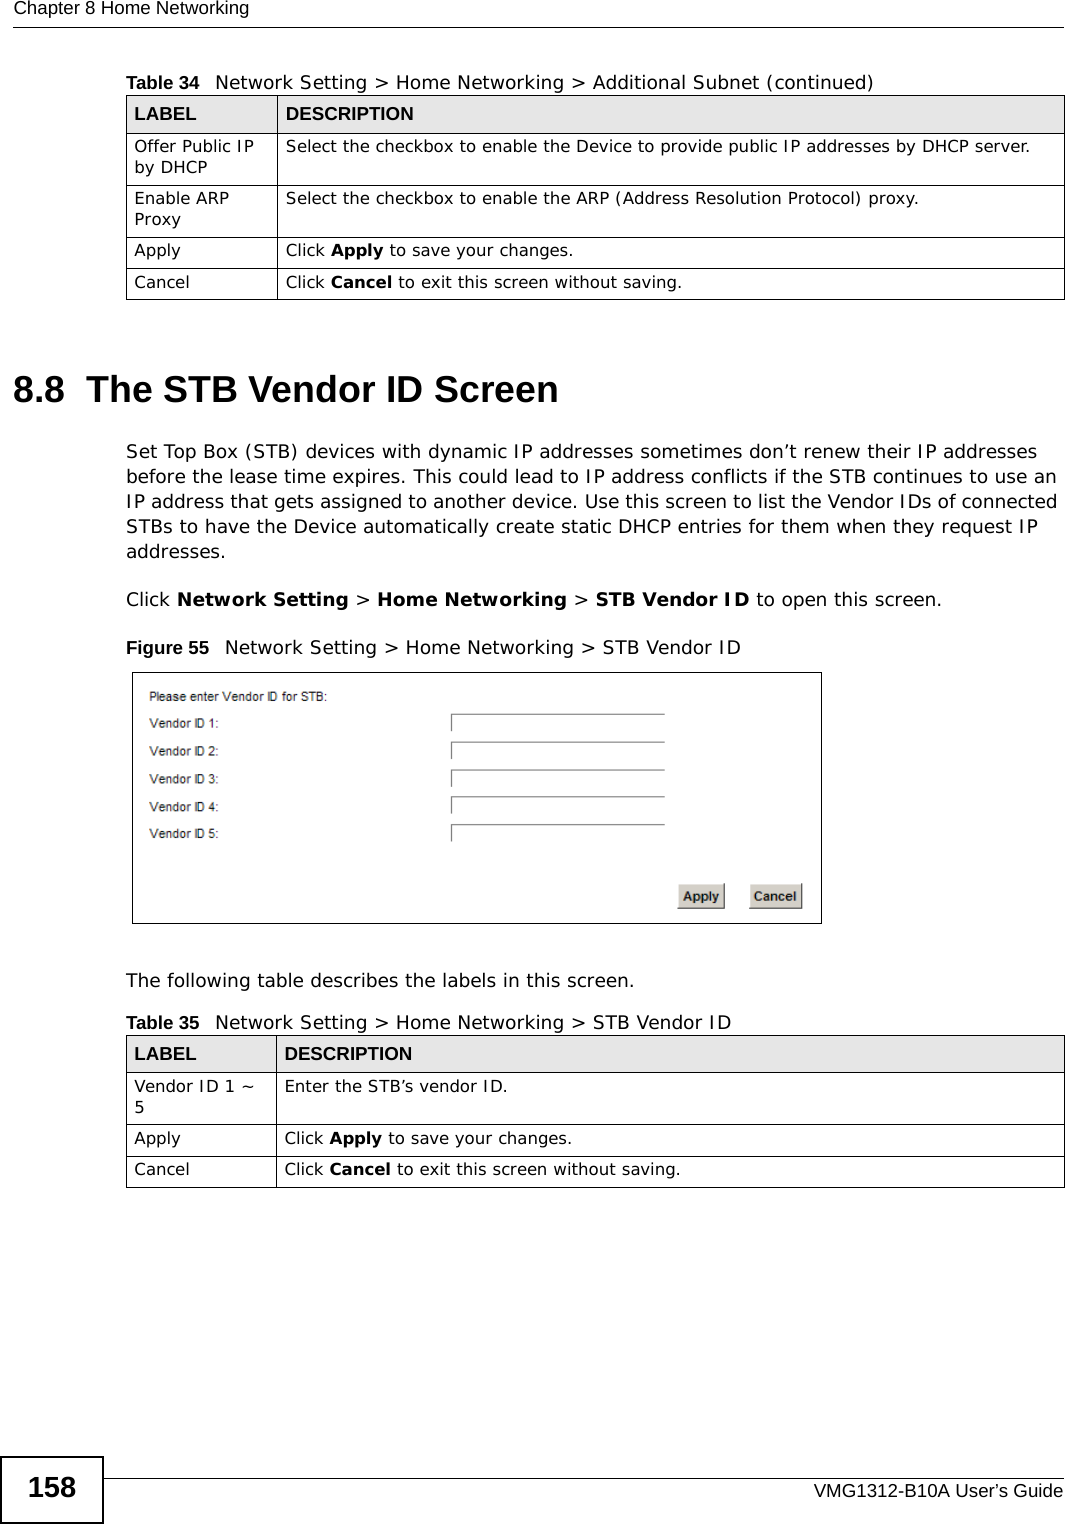 Chapter 8 Home NetworkingVMG1312-B10A User’s Guide1588.8  The STB Vendor ID ScreenSet Top Box (STB) devices with dynamic IP addresses sometimes don’t renew their IP addresses before the lease time expires. This could lead to IP address conflicts if the STB continues to use an IP address that gets assigned to another device. Use this screen to list the Vendor IDs of connected STBs to have the Device automatically create static DHCP entries for them when they request IP addresses.Click Network Setting &gt; Home Networking &gt; STB Vendor ID to open this screen. Figure 55   Network Setting &gt; Home Networking &gt; STB Vendor IDThe following table describes the labels in this screen.Offer Public IP by DHCP Select the checkbox to enable the Device to provide public IP addresses by DHCP server.Enable ARP Proxy Select the checkbox to enable the ARP (Address Resolution Protocol) proxy.Apply Click Apply to save your changes.Cancel Click Cancel to exit this screen without saving.Table 34   Network Setting &gt; Home Networking &gt; Additional Subnet (continued)LABEL DESCRIPTIONTable 35   Network Setting &gt; Home Networking &gt; STB Vendor IDLABEL DESCRIPTIONVendor ID 1 ~ 5Enter the STB’s vendor ID.Apply Click Apply to save your changes.Cancel Click Cancel to exit this screen without saving.